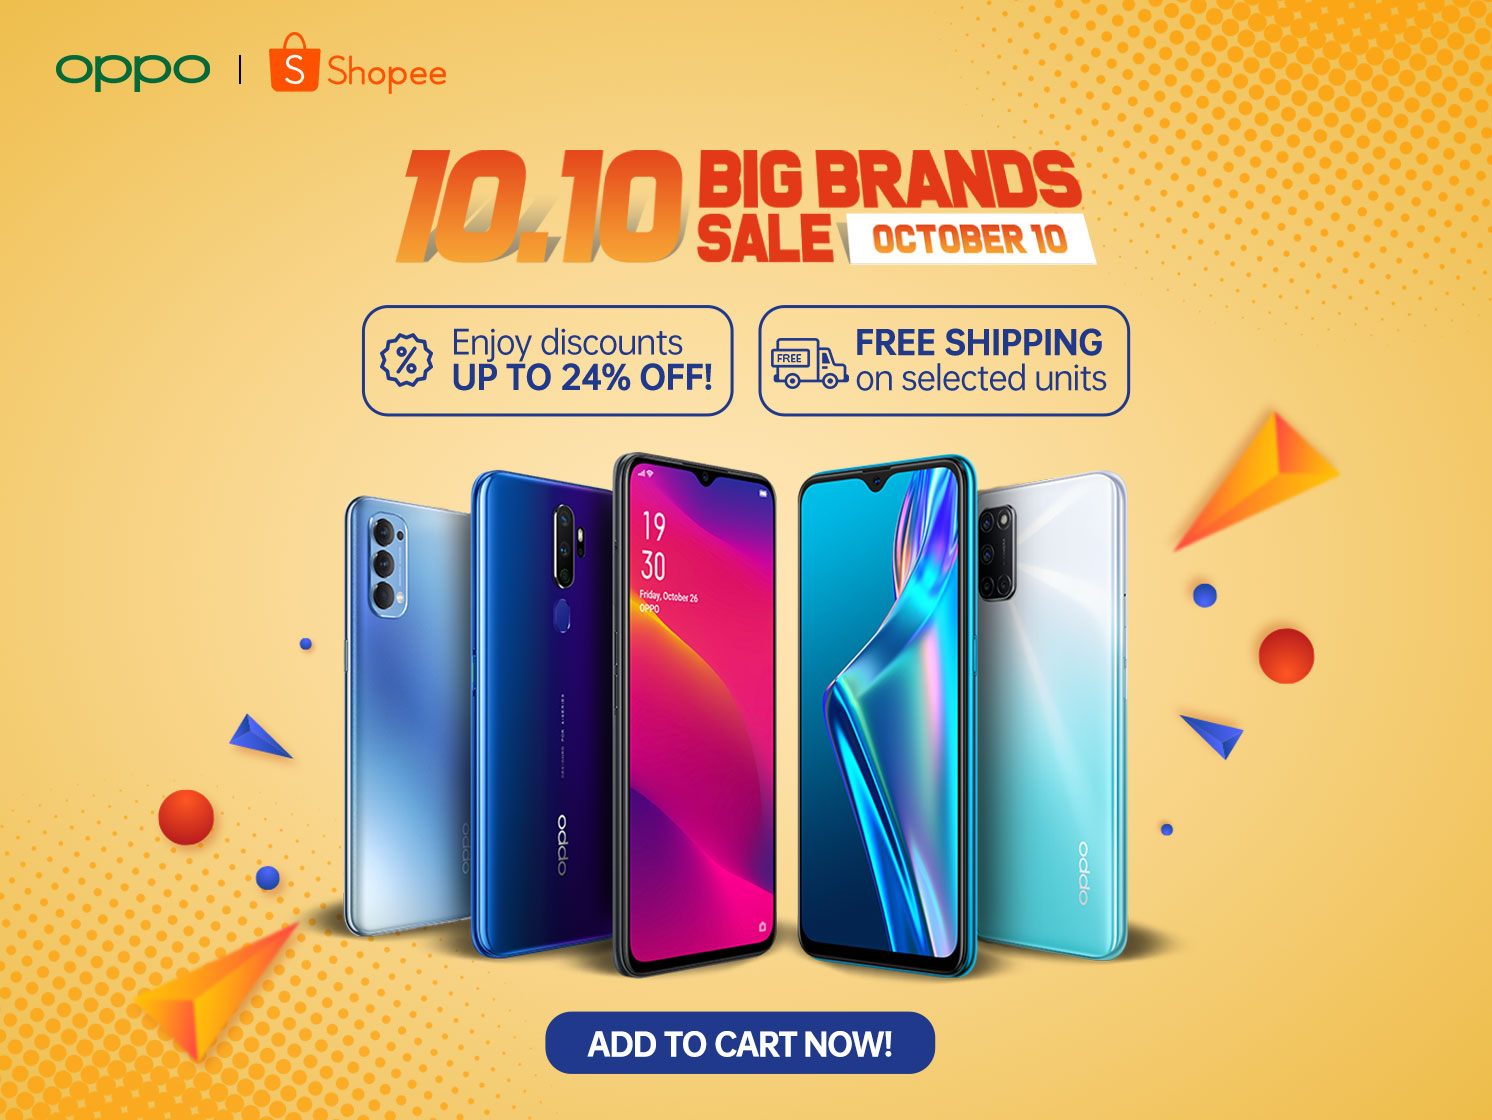 Get up to 24% off on your favorite OPPO at Shopee’s 10.10 Big Brands Sale on October 10 | OPPO ...